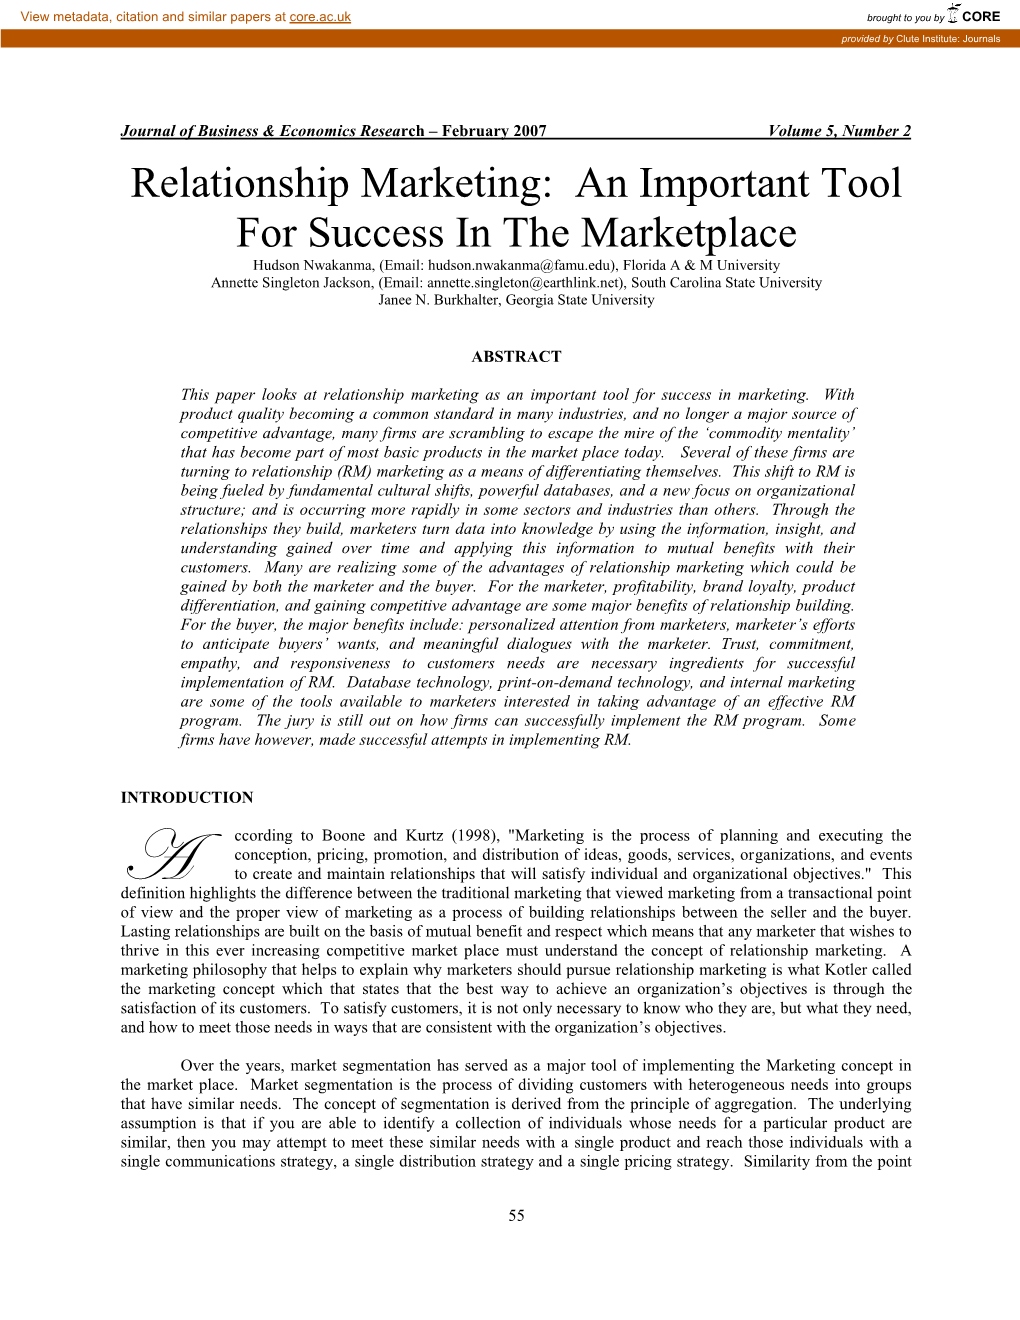 Relationship Marketing and Its Application to the Consumer Market